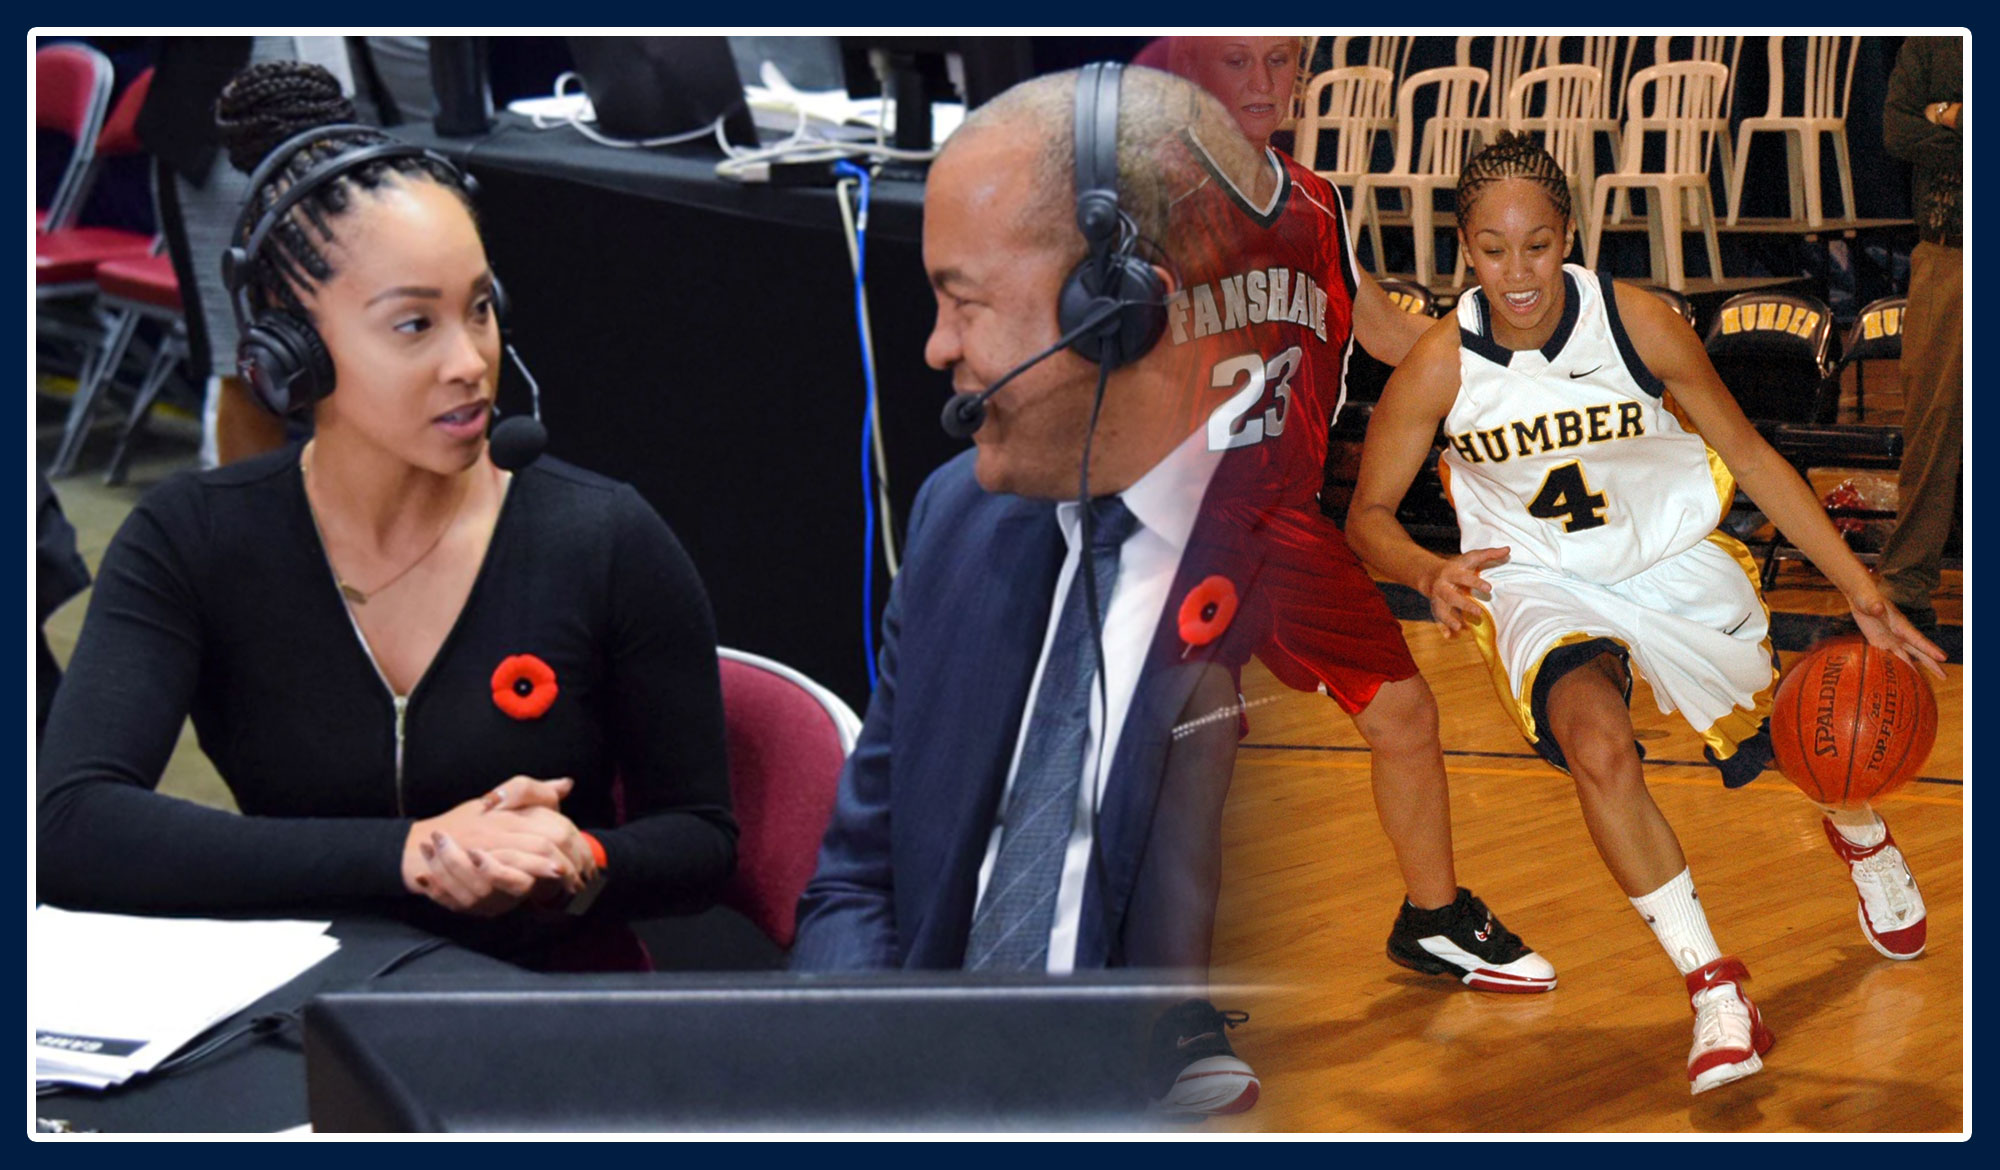 Meghan McPeak doing an interview beside a photo of her playing basketball for Humber